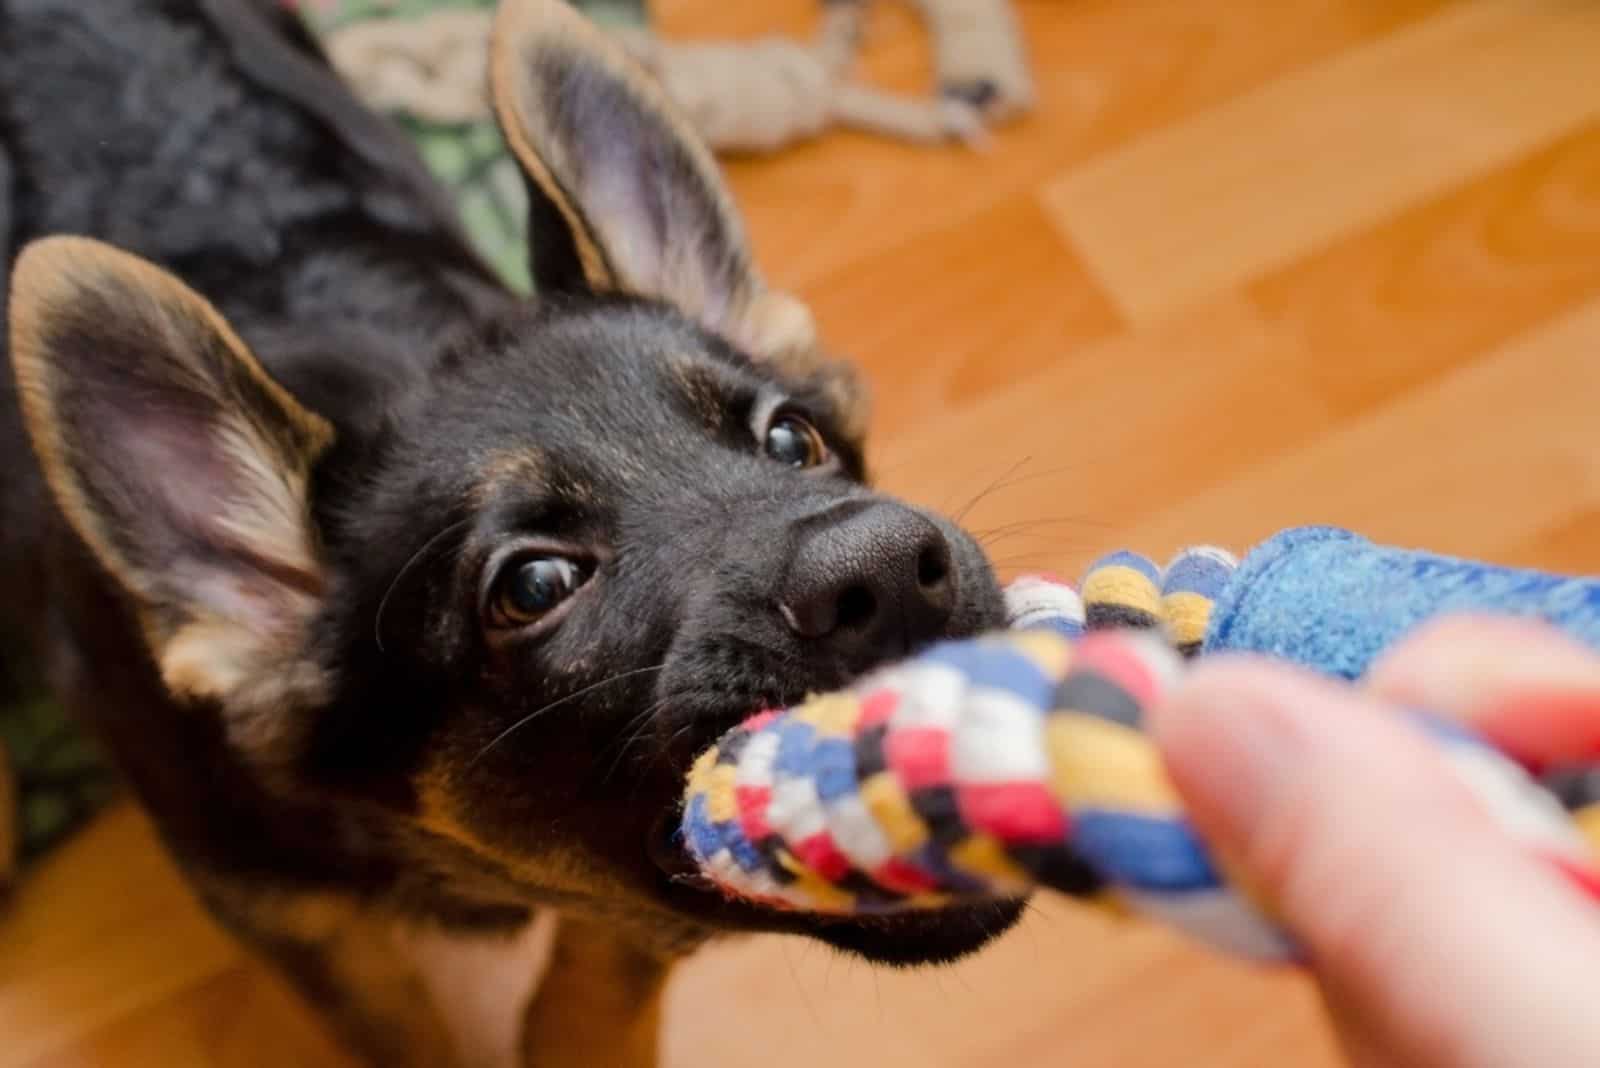 german shepherd puppy pulling a tug toy from his owner's hand